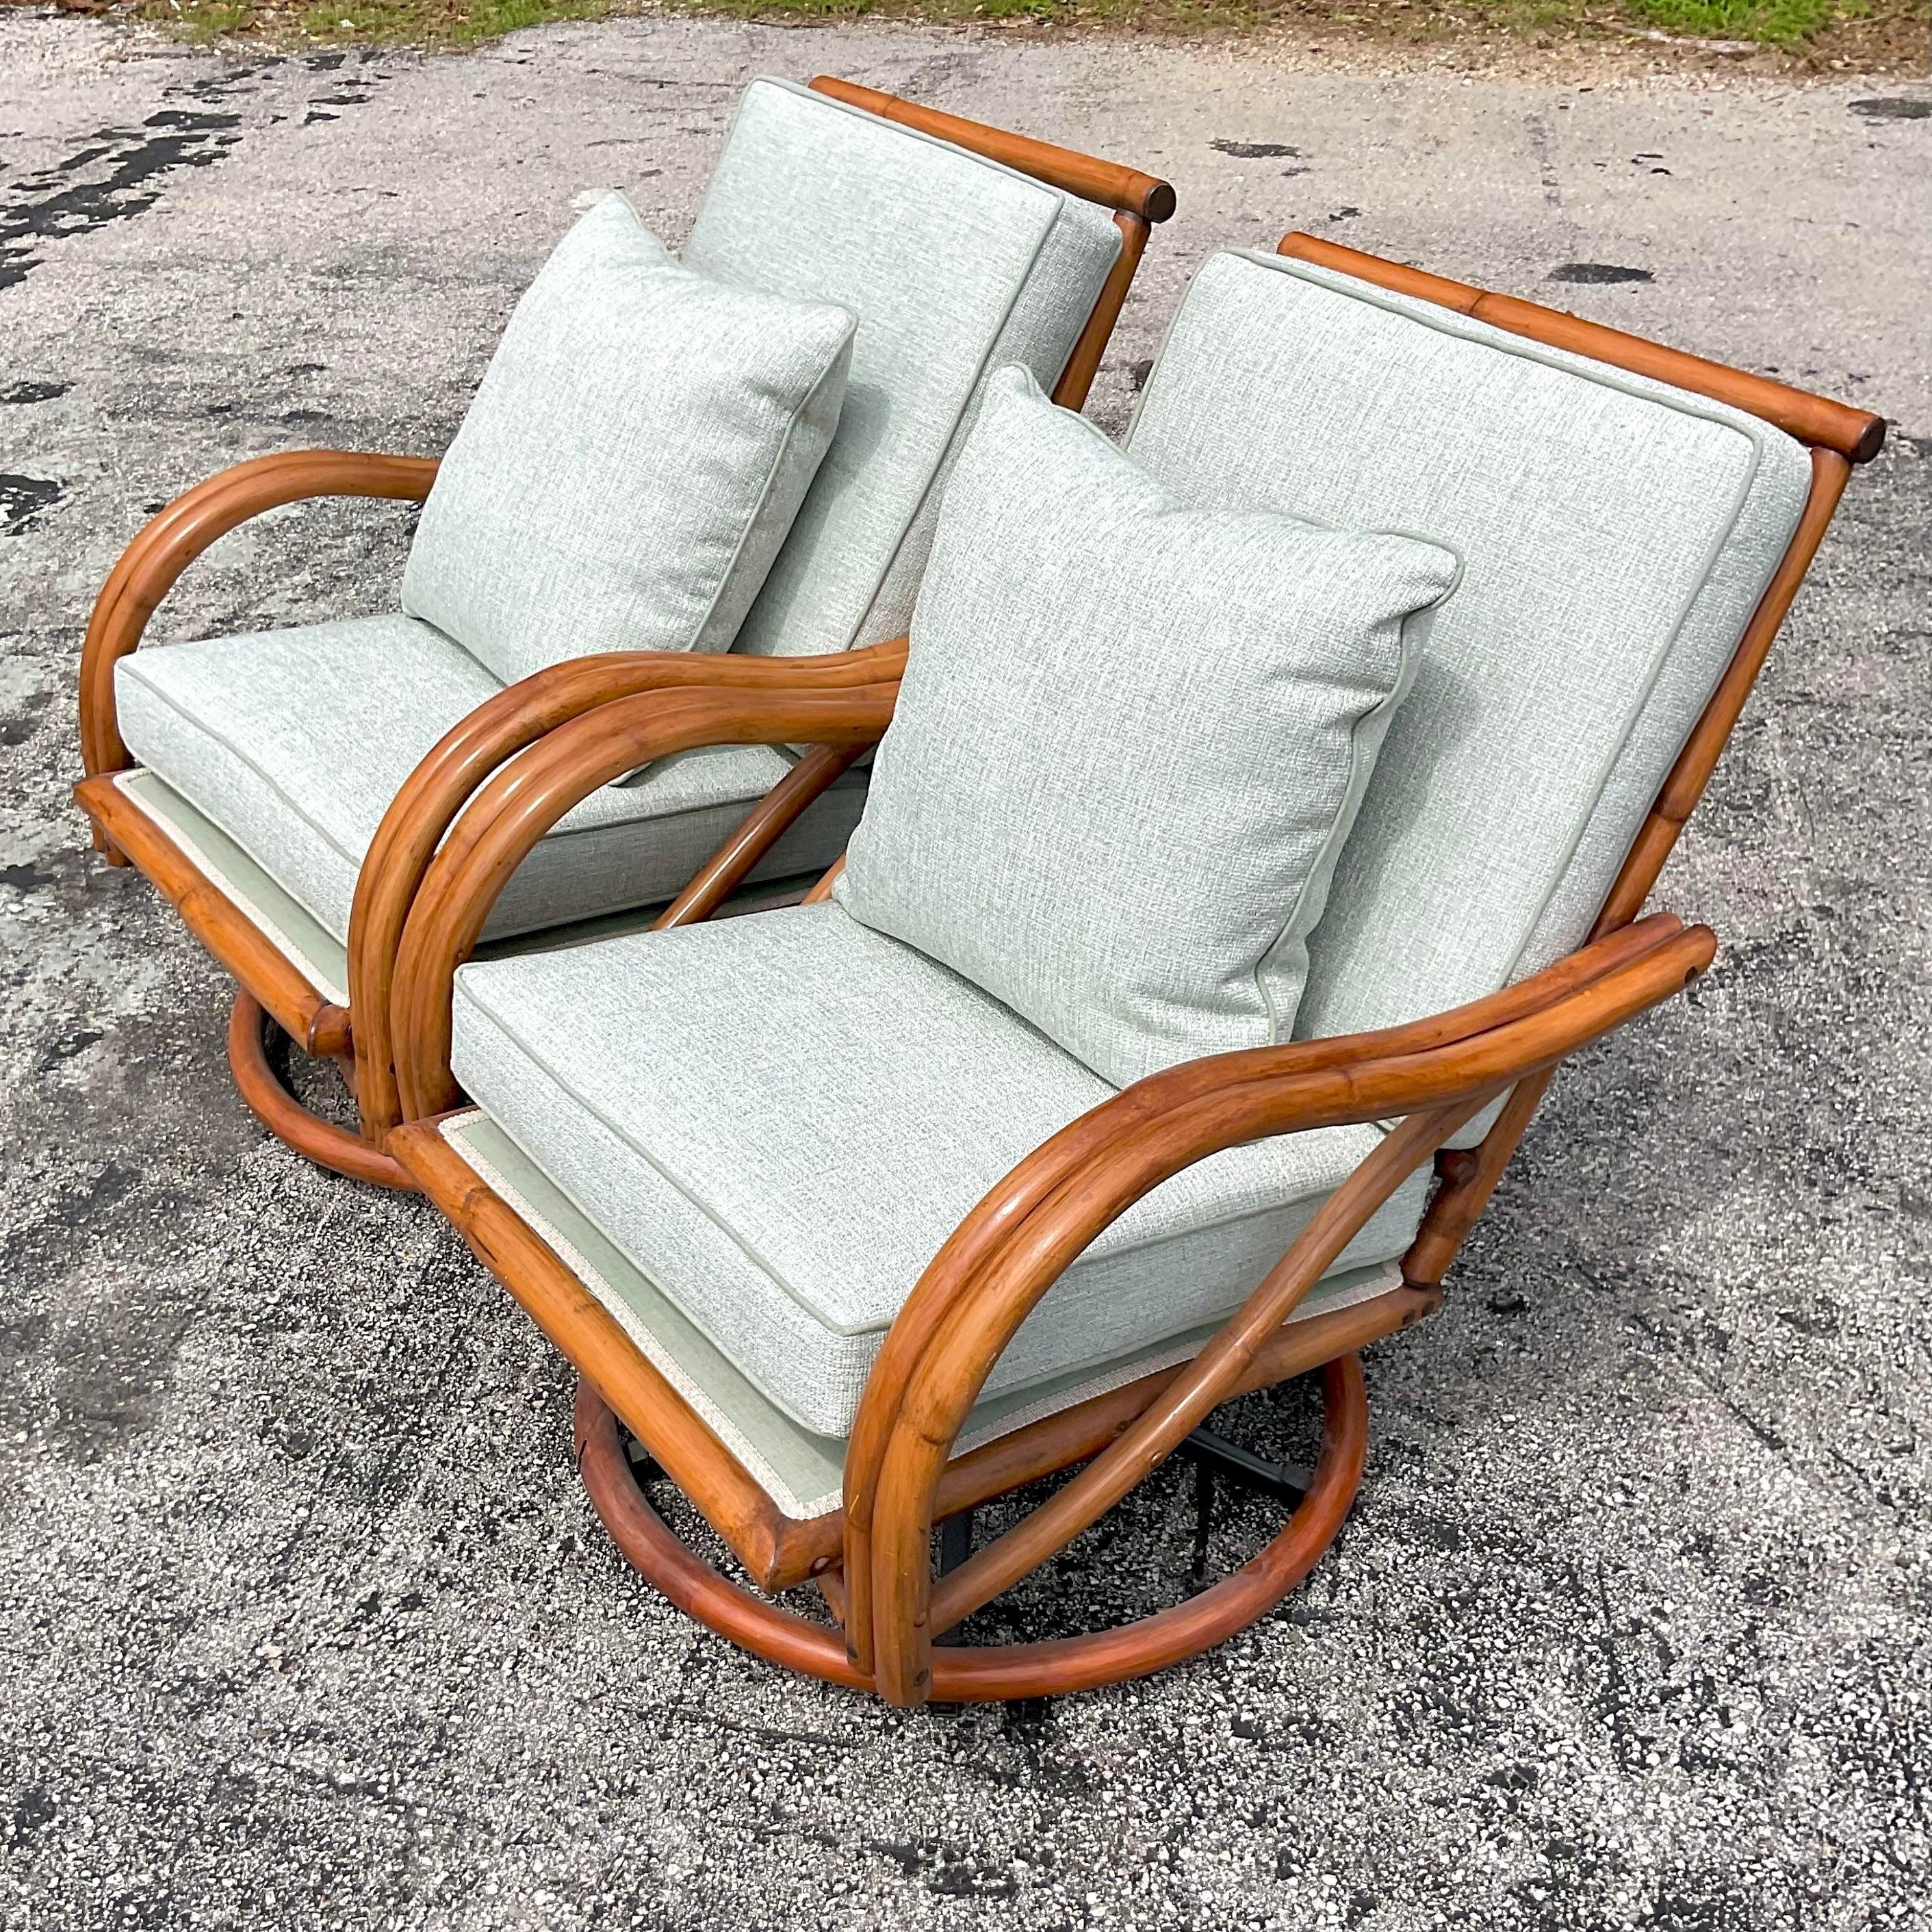 Mid-20th Century Vintage Coastal Bent Rattan Swivel Chairs - a Pair In Good Condition For Sale In west palm beach, FL